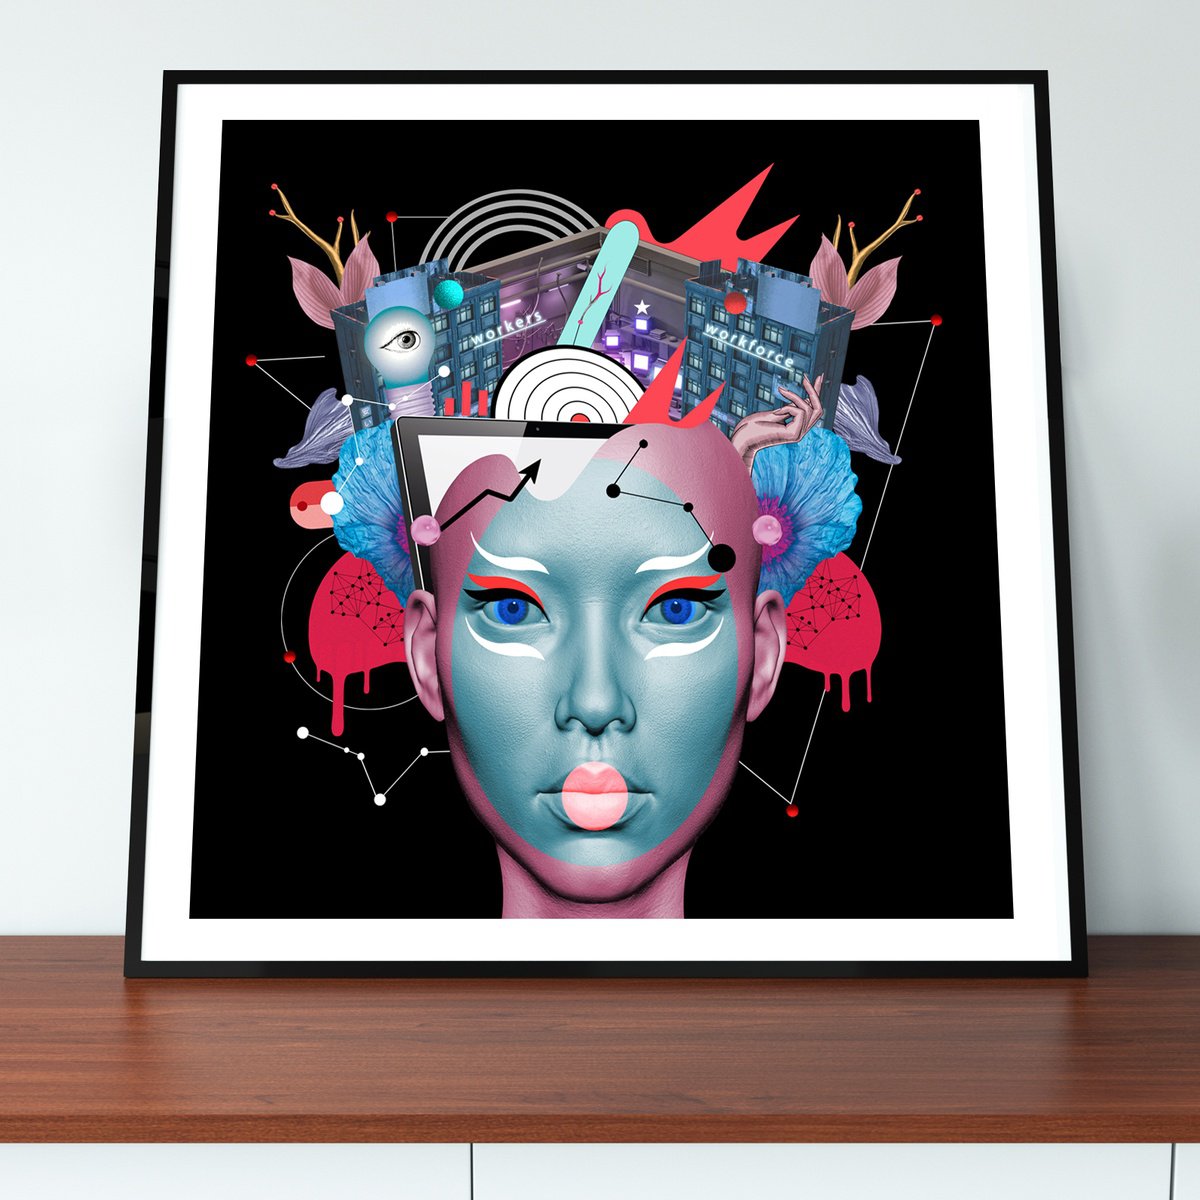 A DREAMER from the future | Limited edition print by Valentina Brostean